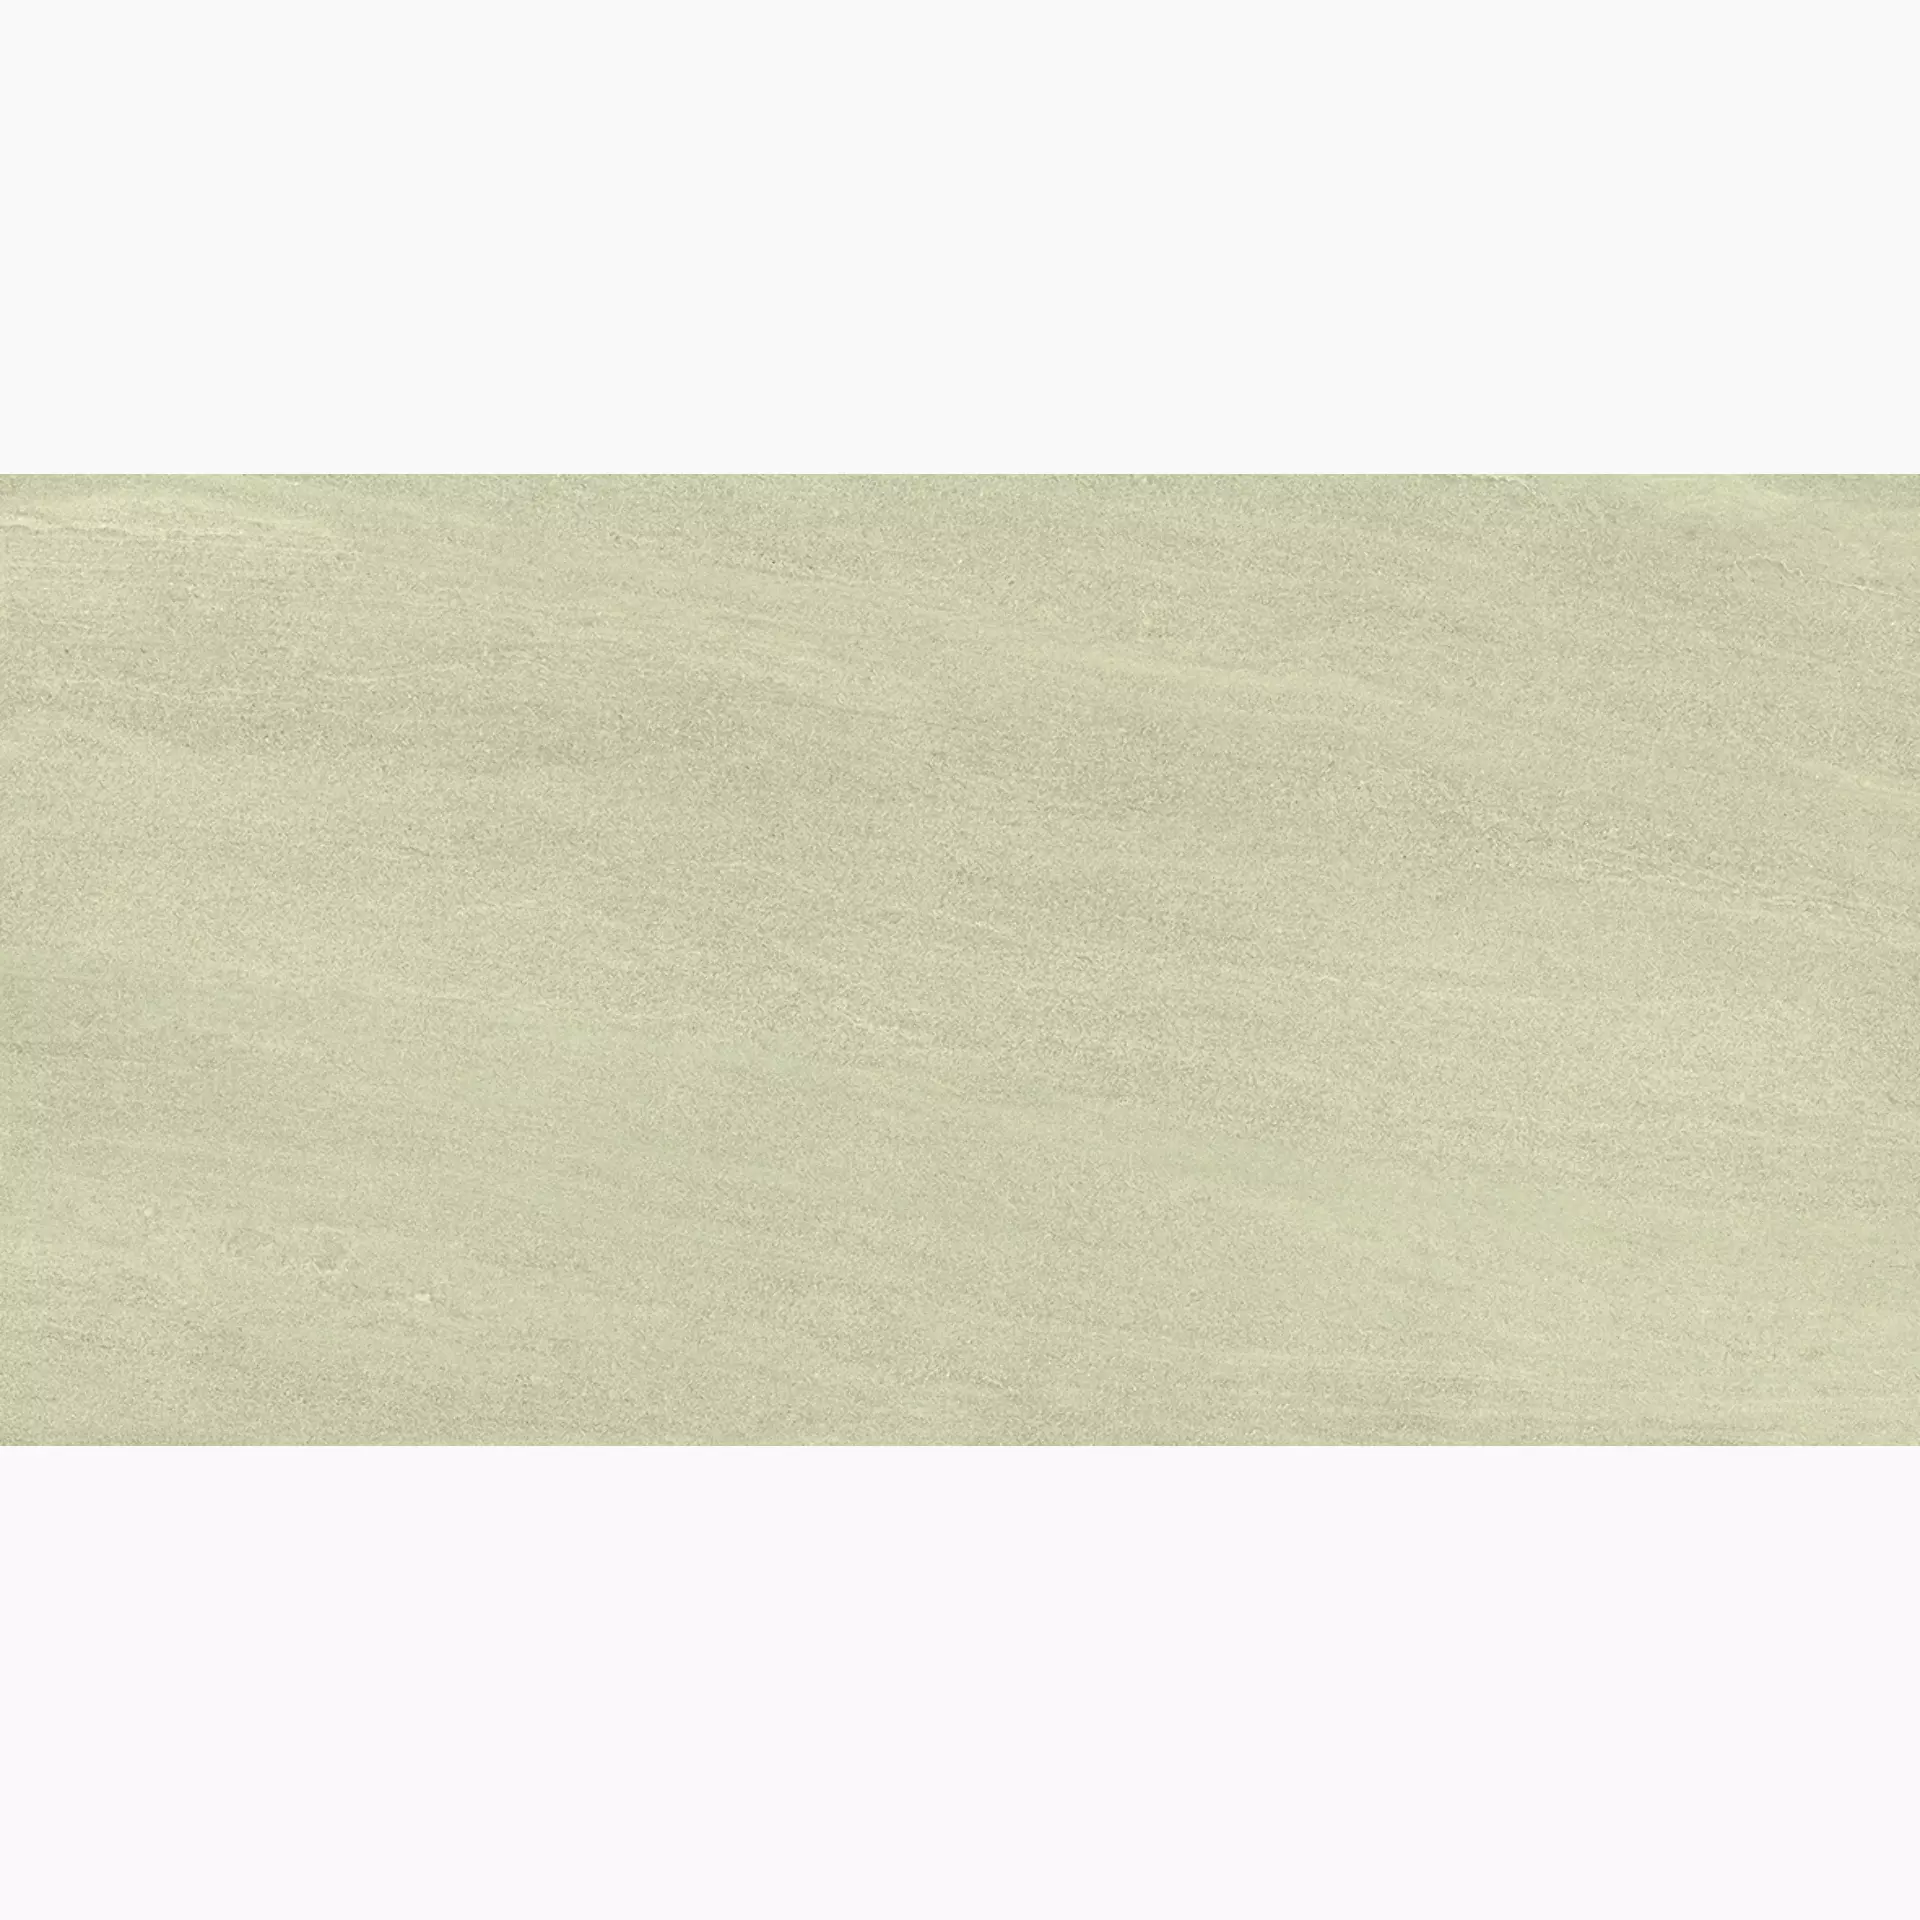 Ergon Elegance Pro Sand Naturale EJYW 60x120cm rectified 9,5mm